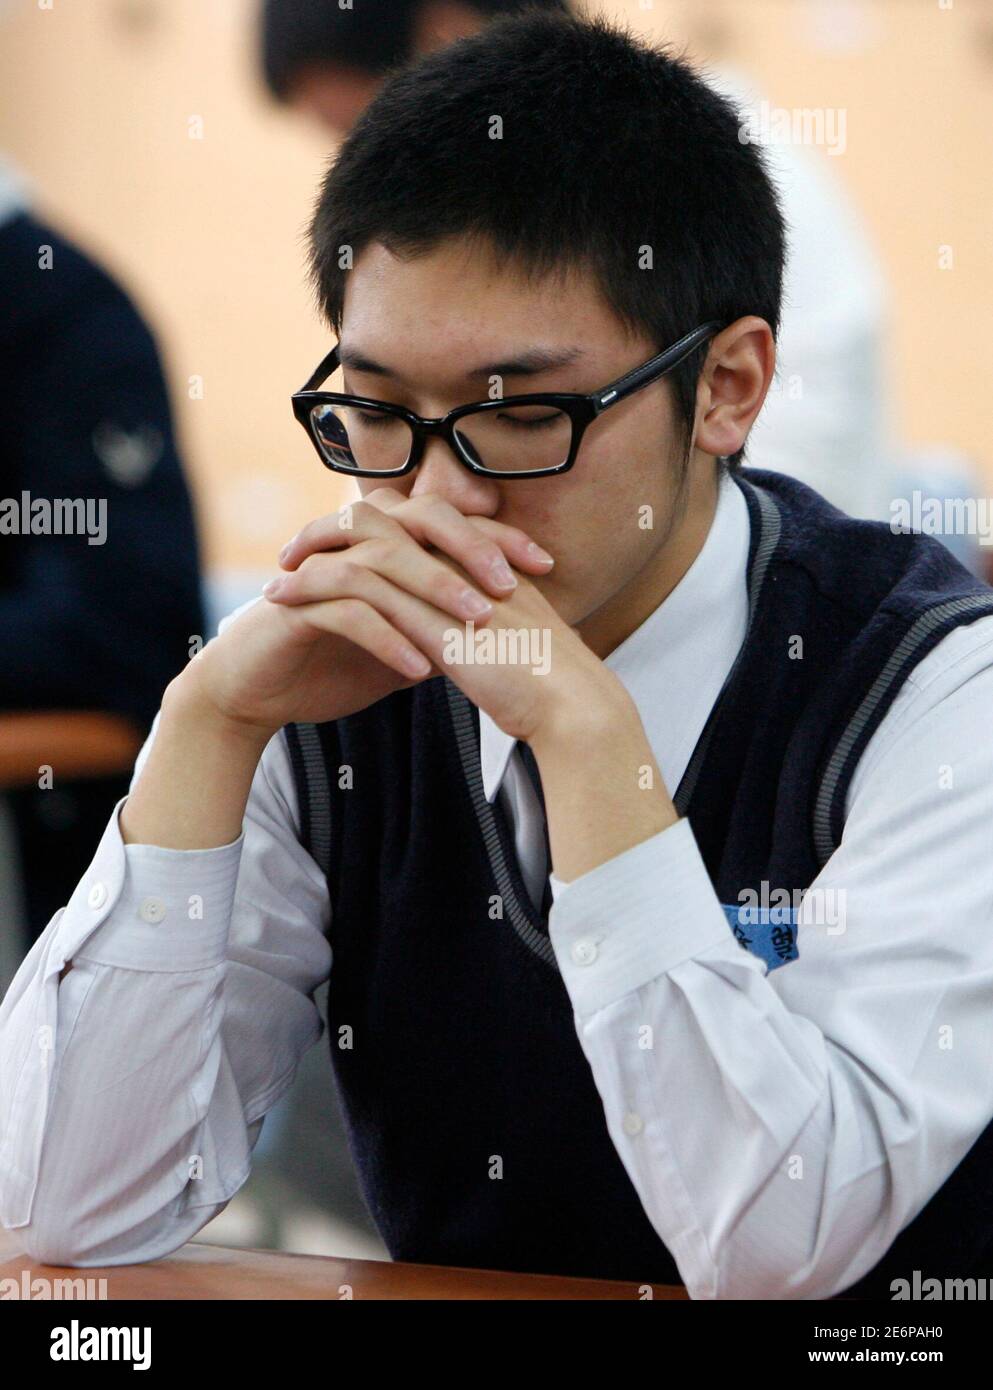 a-student-takes-part-in-the-college-scholastic-ability-test-at-a-school-in-seoul-november-15